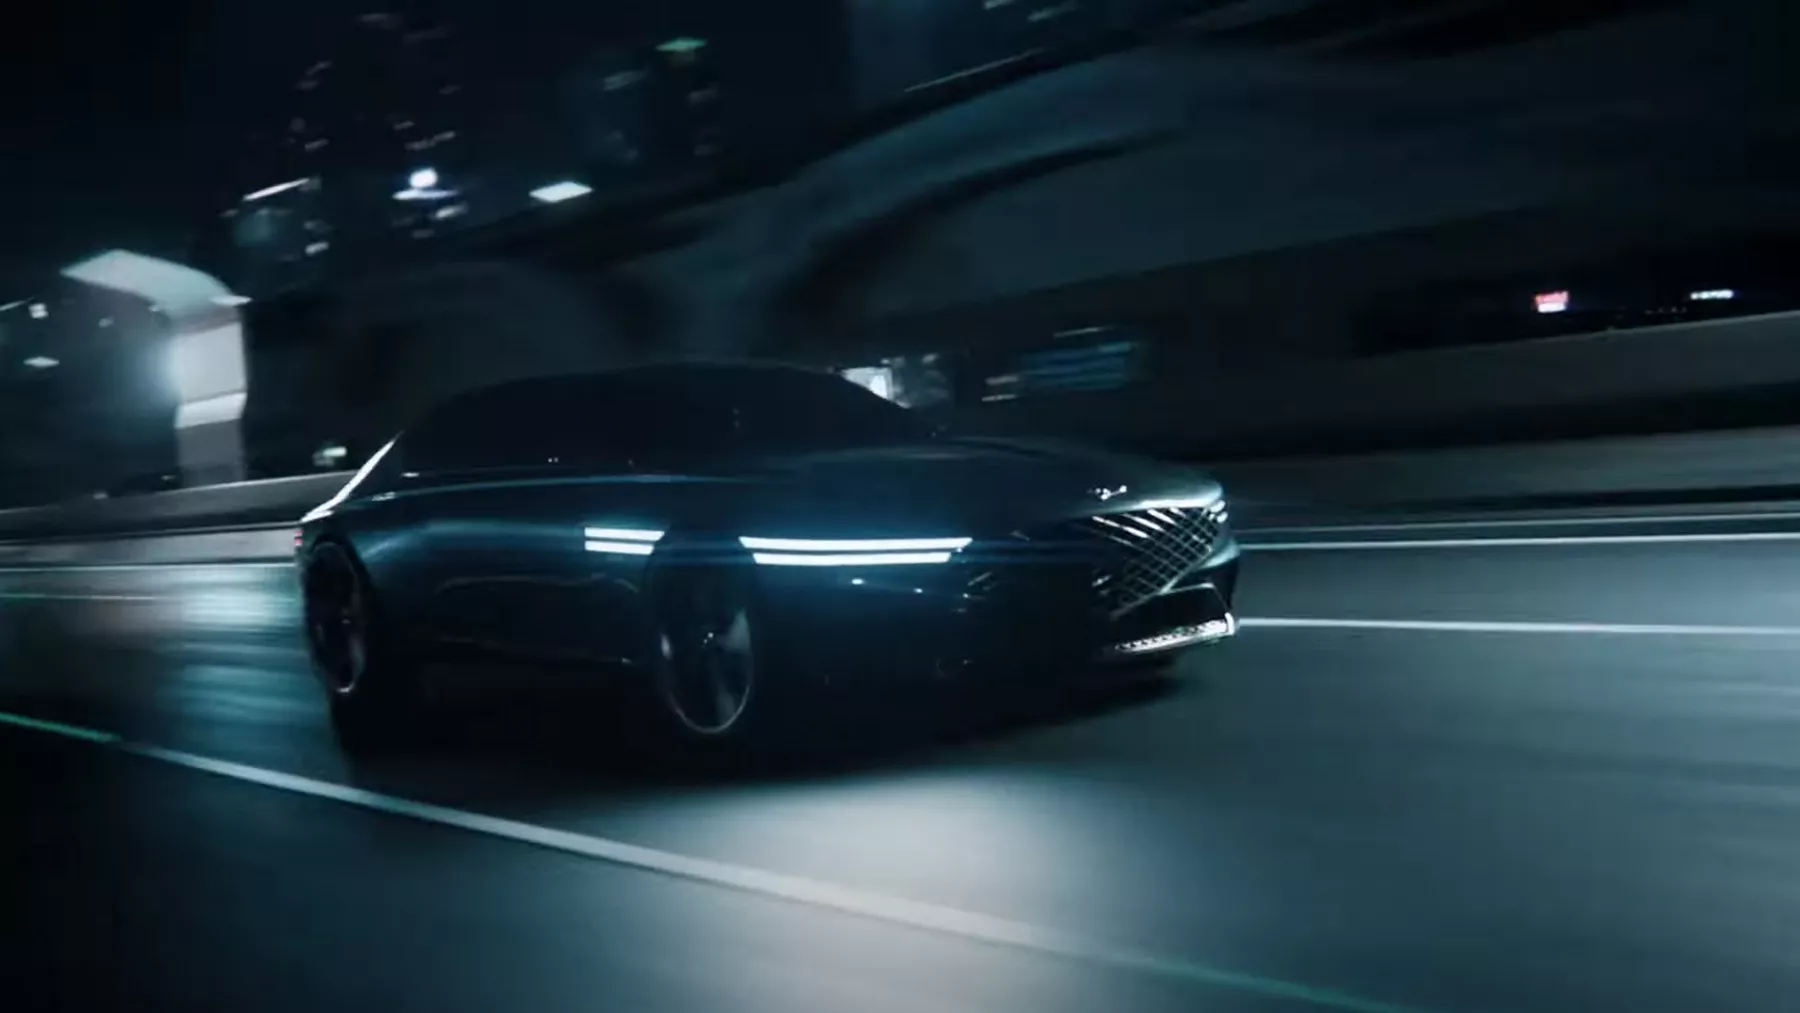 X Concept vehicle driving on highway at night with headlights illuminated.